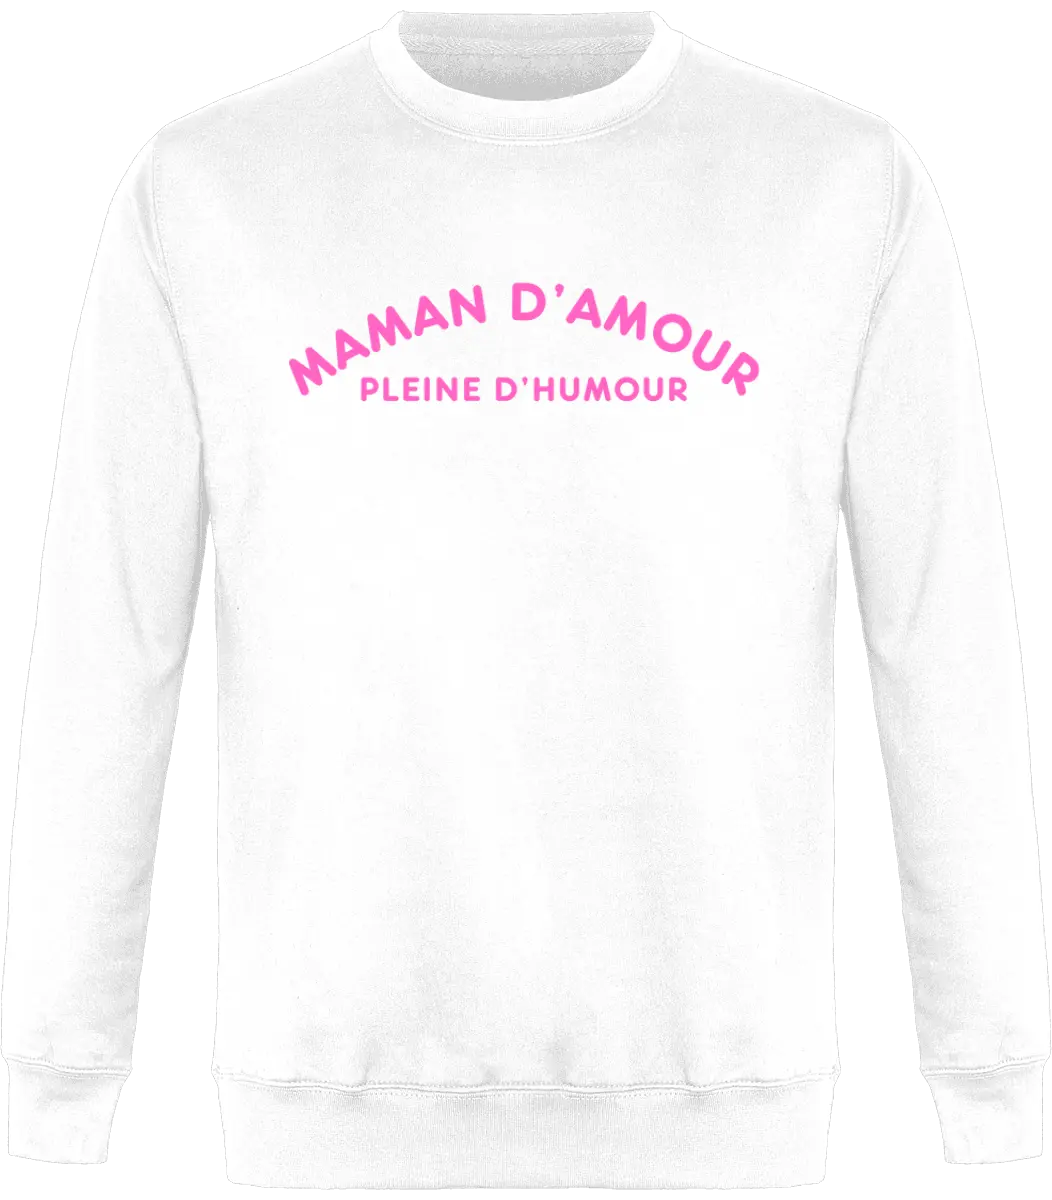 Sweat maman "Maman d'amour pleine d'humour" | Mixte - French Humour